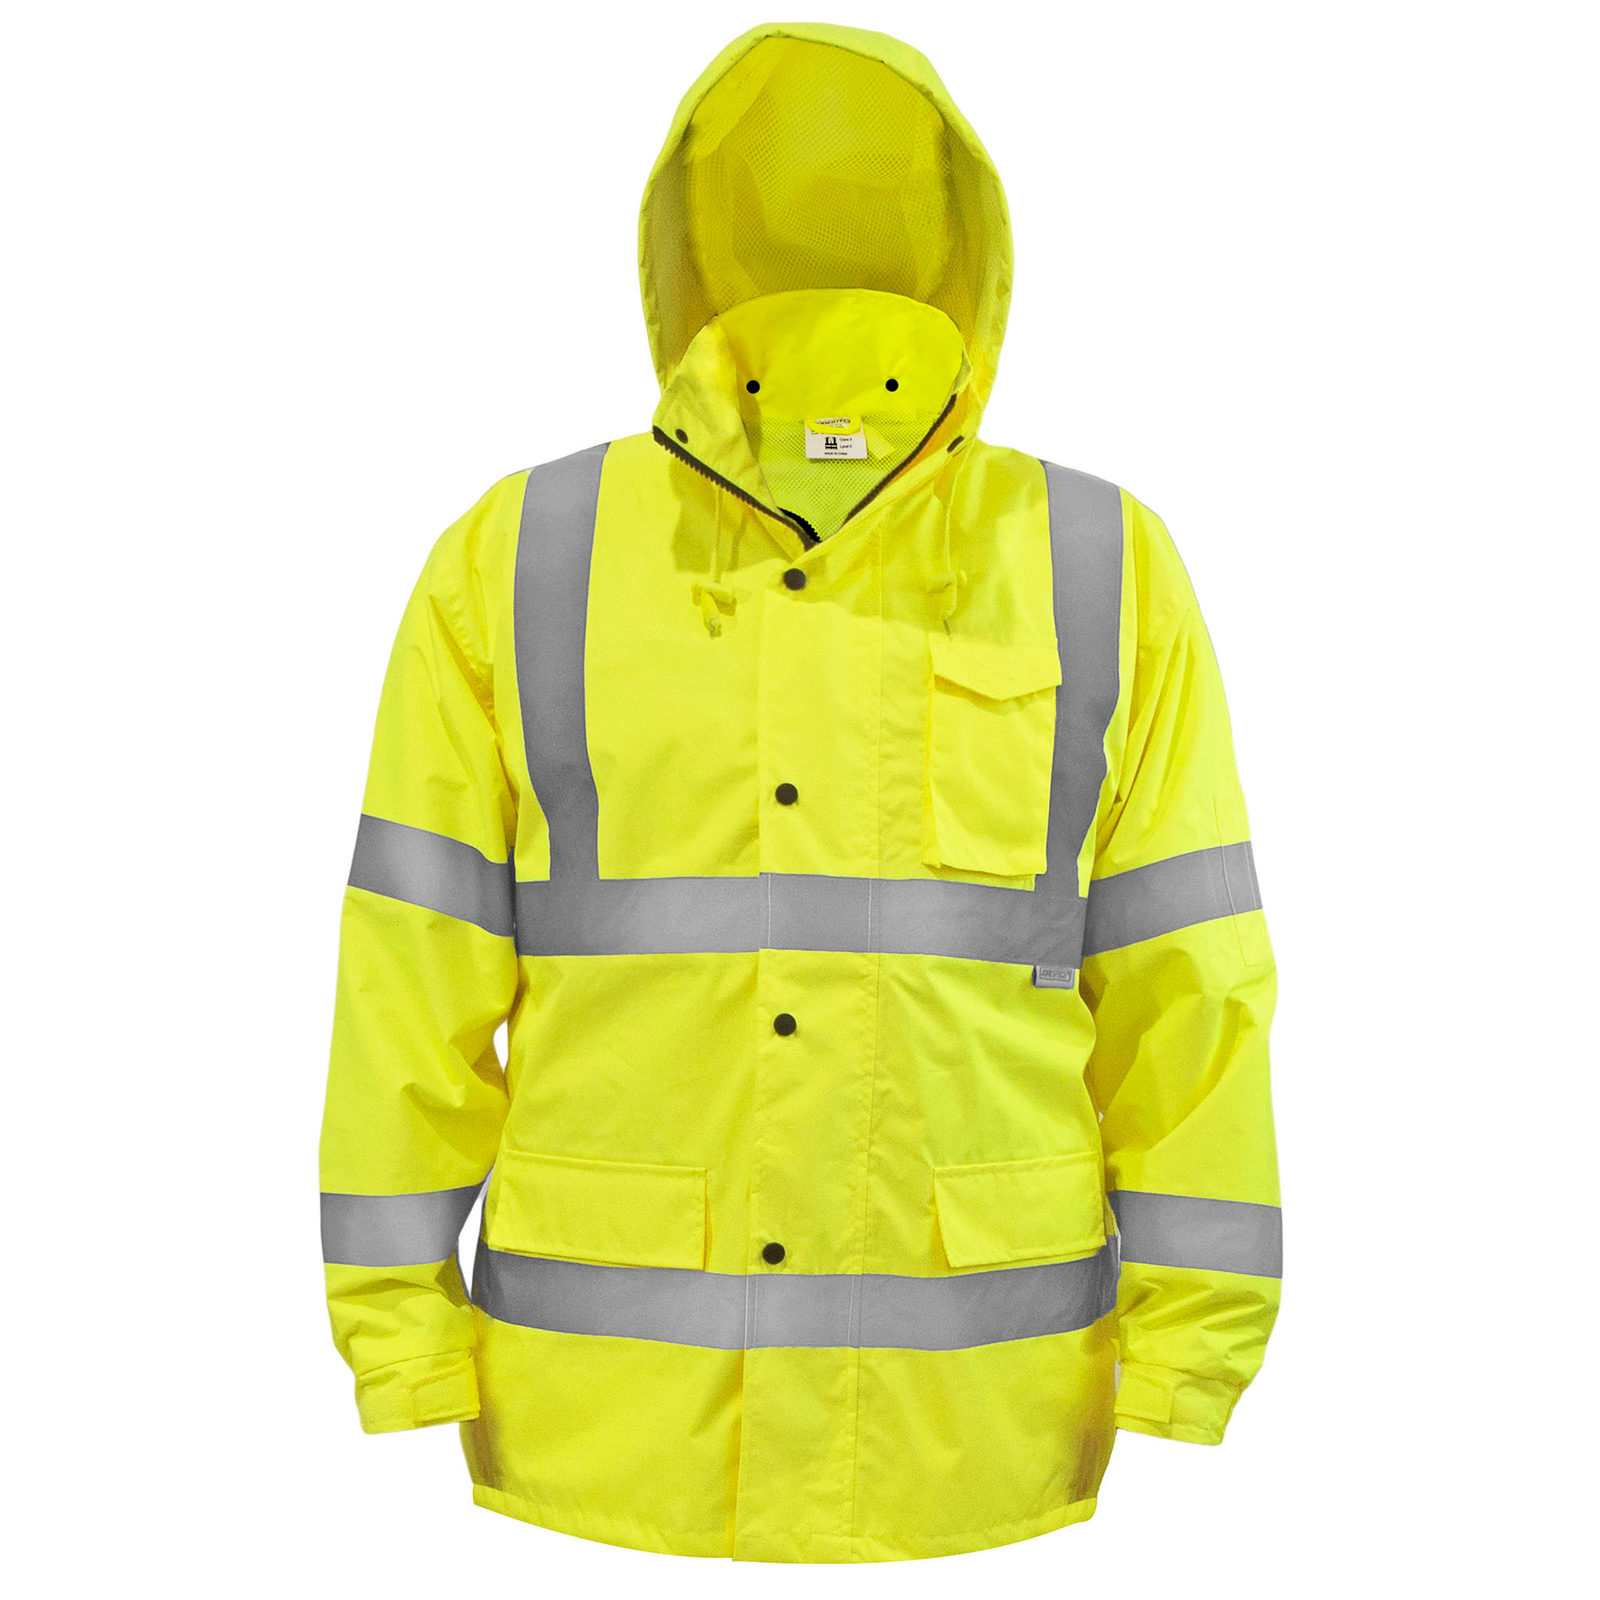 Front view of a JORESTECH all high visibility yellow rain jacket with 2 inches reflective strips